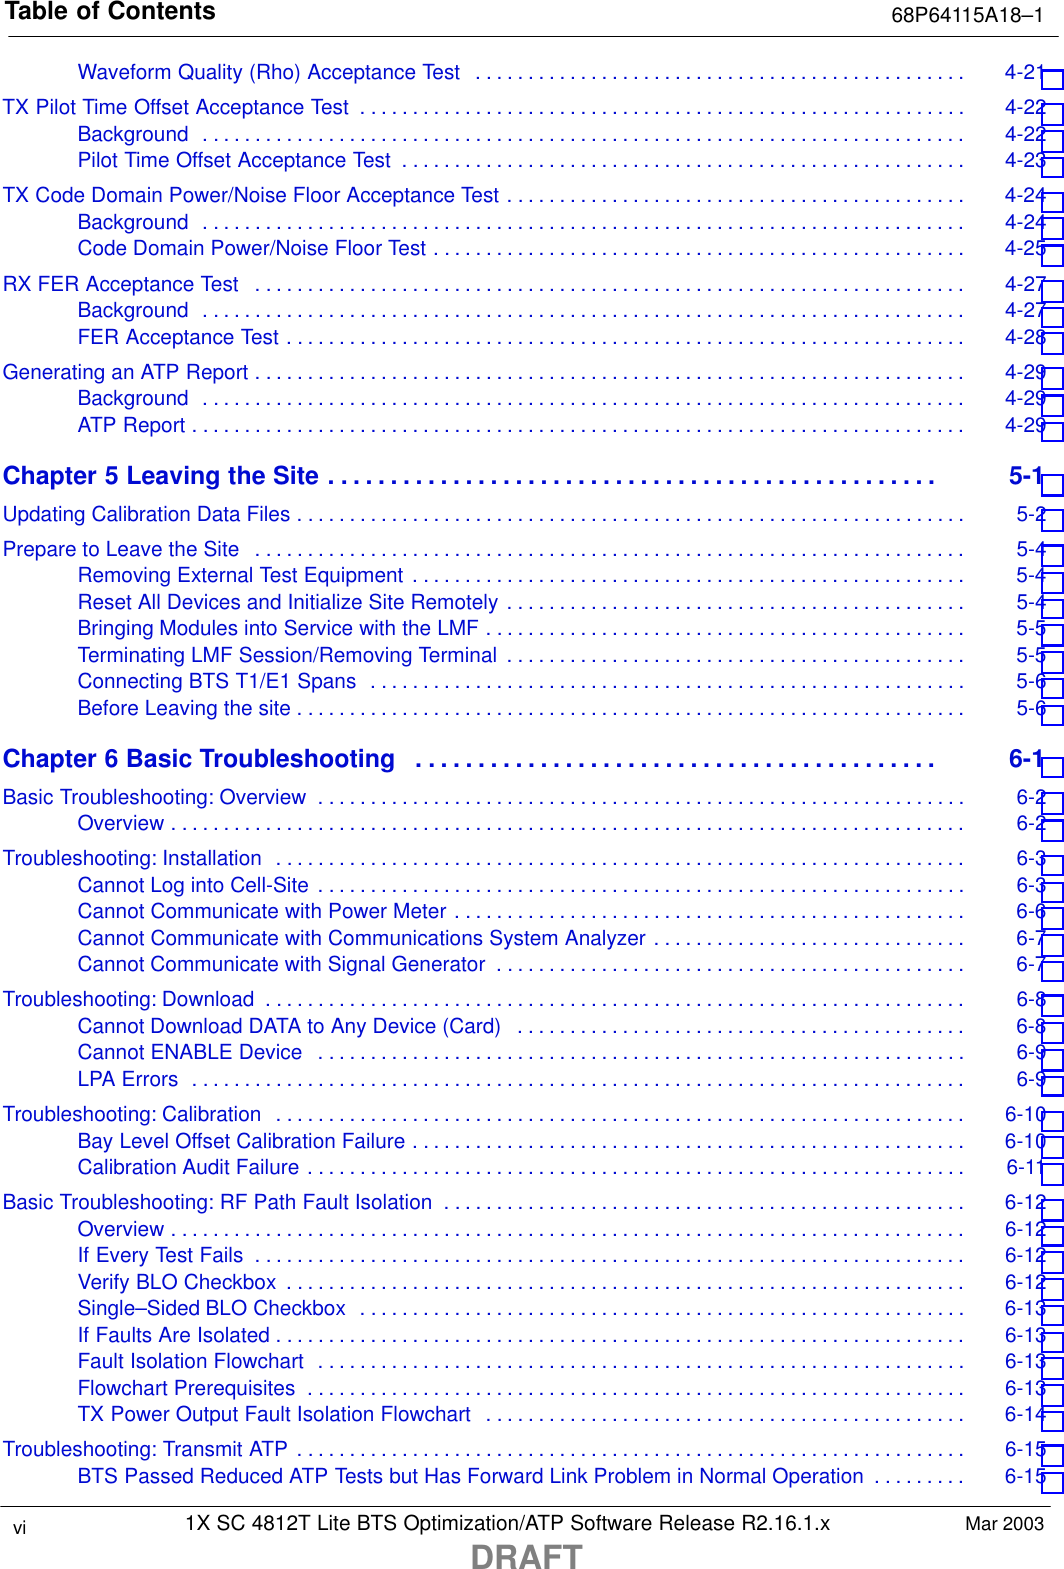 Table of Contents 68P64115A18–11X SC 4812T Lite BTS Optimization/ATP Software Release R2.16.1.xDRAFTvi Mar 2003Waveform Quality (Rho) Acceptance Test 4-21 . . . . . . . . . . . . . . . . . . . . . . . . . . . . . . . . . . . . . . . . . . . . . . . TX Pilot Time Offset Acceptance Test 4-22 . . . . . . . . . . . . . . . . . . . . . . . . . . . . . . . . . . . . . . . . . . . . . . . . . . . . . . . . . . Background 4-22 . . . . . . . . . . . . . . . . . . . . . . . . . . . . . . . . . . . . . . . . . . . . . . . . . . . . . . . . . . . . . . . . . . . . . . . . . Pilot Time Offset Acceptance Test 4-23 . . . . . . . . . . . . . . . . . . . . . . . . . . . . . . . . . . . . . . . . . . . . . . . . . . . . . . TX Code Domain Power/Noise Floor Acceptance Test 4-24 . . . . . . . . . . . . . . . . . . . . . . . . . . . . . . . . . . . . . . . . . . . . Background 4-24 . . . . . . . . . . . . . . . . . . . . . . . . . . . . . . . . . . . . . . . . . . . . . . . . . . . . . . . . . . . . . . . . . . . . . . . . . Code Domain Power/Noise Floor Test 4-25 . . . . . . . . . . . . . . . . . . . . . . . . . . . . . . . . . . . . . . . . . . . . . . . . . . . RX FER Acceptance Test 4-27 . . . . . . . . . . . . . . . . . . . . . . . . . . . . . . . . . . . . . . . . . . . . . . . . . . . . . . . . . . . . . . . . . . . . Background 4-27 . . . . . . . . . . . . . . . . . . . . . . . . . . . . . . . . . . . . . . . . . . . . . . . . . . . . . . . . . . . . . . . . . . . . . . . . . FER Acceptance Test 4-28 . . . . . . . . . . . . . . . . . . . . . . . . . . . . . . . . . . . . . . . . . . . . . . . . . . . . . . . . . . . . . . . . . Generating an ATP Report 4-29 . . . . . . . . . . . . . . . . . . . . . . . . . . . . . . . . . . . . . . . . . . . . . . . . . . . . . . . . . . . . . . . . . . . . Background 4-29 . . . . . . . . . . . . . . . . . . . . . . . . . . . . . . . . . . . . . . . . . . . . . . . . . . . . . . . . . . . . . . . . . . . . . . . . . ATP Report 4-29 . . . . . . . . . . . . . . . . . . . . . . . . . . . . . . . . . . . . . . . . . . . . . . . . . . . . . . . . . . . . . . . . . . . . . . . . . . Chapter 5 Leaving the Site 5-1 . . . . . . . . . . . . . . . . . . . . . . . . . . . . . . . . . . . . . . . . . . . . . . . . . Updating Calibration Data Files 5-2 . . . . . . . . . . . . . . . . . . . . . . . . . . . . . . . . . . . . . . . . . . . . . . . . . . . . . . . . . . . . . . . . Prepare to Leave the Site 5-4 . . . . . . . . . . . . . . . . . . . . . . . . . . . . . . . . . . . . . . . . . . . . . . . . . . . . . . . . . . . . . . . . . . . . Removing External Test Equipment 5-4 . . . . . . . . . . . . . . . . . . . . . . . . . . . . . . . . . . . . . . . . . . . . . . . . . . . . . Reset All Devices and Initialize Site Remotely 5-4 . . . . . . . . . . . . . . . . . . . . . . . . . . . . . . . . . . . . . . . . . . . . Bringing Modules into Service with the LMF 5-5 . . . . . . . . . . . . . . . . . . . . . . . . . . . . . . . . . . . . . . . . . . . . . . Terminating LMF Session/Removing Terminal 5-5 . . . . . . . . . . . . . . . . . . . . . . . . . . . . . . . . . . . . . . . . . . . . Connecting BTS T1/E1 Spans 5-6 . . . . . . . . . . . . . . . . . . . . . . . . . . . . . . . . . . . . . . . . . . . . . . . . . . . . . . . . . Before Leaving the site 5-6 . . . . . . . . . . . . . . . . . . . . . . . . . . . . . . . . . . . . . . . . . . . . . . . . . . . . . . . . . . . . . . . . Chapter 6 Basic Troubleshooting 6-1 . . . . . . . . . . . . . . . . . . . . . . . . . . . . . . . . . . . . . . . . . . Basic Troubleshooting: Overview 6-2 . . . . . . . . . . . . . . . . . . . . . . . . . . . . . . . . . . . . . . . . . . . . . . . . . . . . . . . . . . . . . . Overview 6-2 . . . . . . . . . . . . . . . . . . . . . . . . . . . . . . . . . . . . . . . . . . . . . . . . . . . . . . . . . . . . . . . . . . . . . . . . . . . . Troubleshooting: Installation 6-3 . . . . . . . . . . . . . . . . . . . . . . . . . . . . . . . . . . . . . . . . . . . . . . . . . . . . . . . . . . . . . . . . . . Cannot Log into Cell-Site 6-3 . . . . . . . . . . . . . . . . . . . . . . . . . . . . . . . . . . . . . . . . . . . . . . . . . . . . . . . . . . . . . . Cannot Communicate with Power Meter 6-6 . . . . . . . . . . . . . . . . . . . . . . . . . . . . . . . . . . . . . . . . . . . . . . . . . Cannot Communicate with Communications System Analyzer 6-7 . . . . . . . . . . . . . . . . . . . . . . . . . . . . . . Cannot Communicate with Signal Generator 6-7 . . . . . . . . . . . . . . . . . . . . . . . . . . . . . . . . . . . . . . . . . . . . . Troubleshooting: Download 6-8 . . . . . . . . . . . . . . . . . . . . . . . . . . . . . . . . . . . . . . . . . . . . . . . . . . . . . . . . . . . . . . . . . . . Cannot Download DATA to Any Device (Card) 6-8 . . . . . . . . . . . . . . . . . . . . . . . . . . . . . . . . . . . . . . . . . . . Cannot ENABLE Device 6-9 . . . . . . . . . . . . . . . . . . . . . . . . . . . . . . . . . . . . . . . . . . . . . . . . . . . . . . . . . . . . . . LPA Errors 6-9 . . . . . . . . . . . . . . . . . . . . . . . . . . . . . . . . . . . . . . . . . . . . . . . . . . . . . . . . . . . . . . . . . . . . . . . . . . Troubleshooting: Calibration 6-10 . . . . . . . . . . . . . . . . . . . . . . . . . . . . . . . . . . . . . . . . . . . . . . . . . . . . . . . . . . . . . . . . . . Bay Level Offset Calibration Failure 6-10 . . . . . . . . . . . . . . . . . . . . . . . . . . . . . . . . . . . . . . . . . . . . . . . . . . . . . Calibration Audit Failure 6-11 . . . . . . . . . . . . . . . . . . . . . . . . . . . . . . . . . . . . . . . . . . . . . . . . . . . . . . . . . . . . . . . Basic Troubleshooting: RF Path Fault Isolation 6-12 . . . . . . . . . . . . . . . . . . . . . . . . . . . . . . . . . . . . . . . . . . . . . . . . . . Overview 6-12 . . . . . . . . . . . . . . . . . . . . . . . . . . . . . . . . . . . . . . . . . . . . . . . . . . . . . . . . . . . . . . . . . . . . . . . . . . . . If Every Test Fails 6-12 . . . . . . . . . . . . . . . . . . . . . . . . . . . . . . . . . . . . . . . . . . . . . . . . . . . . . . . . . . . . . . . . . . . . Verify BLO Checkbox 6-12 . . . . . . . . . . . . . . . . . . . . . . . . . . . . . . . . . . . . . . . . . . . . . . . . . . . . . . . . . . . . . . . . . Single–Sided BLO Checkbox 6-13 . . . . . . . . . . . . . . . . . . . . . . . . . . . . . . . . . . . . . . . . . . . . . . . . . . . . . . . . . . If Faults Are Isolated 6-13 . . . . . . . . . . . . . . . . . . . . . . . . . . . . . . . . . . . . . . . . . . . . . . . . . . . . . . . . . . . . . . . . . . Fault Isolation Flowchart 6-13 . . . . . . . . . . . . . . . . . . . . . . . . . . . . . . . . . . . . . . . . . . . . . . . . . . . . . . . . . . . . . . Flowchart Prerequisites 6-13 . . . . . . . . . . . . . . . . . . . . . . . . . . . . . . . . . . . . . . . . . . . . . . . . . . . . . . . . . . . . . . . TX Power Output Fault Isolation Flowchart 6-14 . . . . . . . . . . . . . . . . . . . . . . . . . . . . . . . . . . . . . . . . . . . . . . Troubleshooting: Transmit ATP 6-15 . . . . . . . . . . . . . . . . . . . . . . . . . . . . . . . . . . . . . . . . . . . . . . . . . . . . . . . . . . . . . . . . BTS Passed Reduced ATP Tests but Has Forward Link Problem in Normal Operation 6-15 . . . . . . . . . 